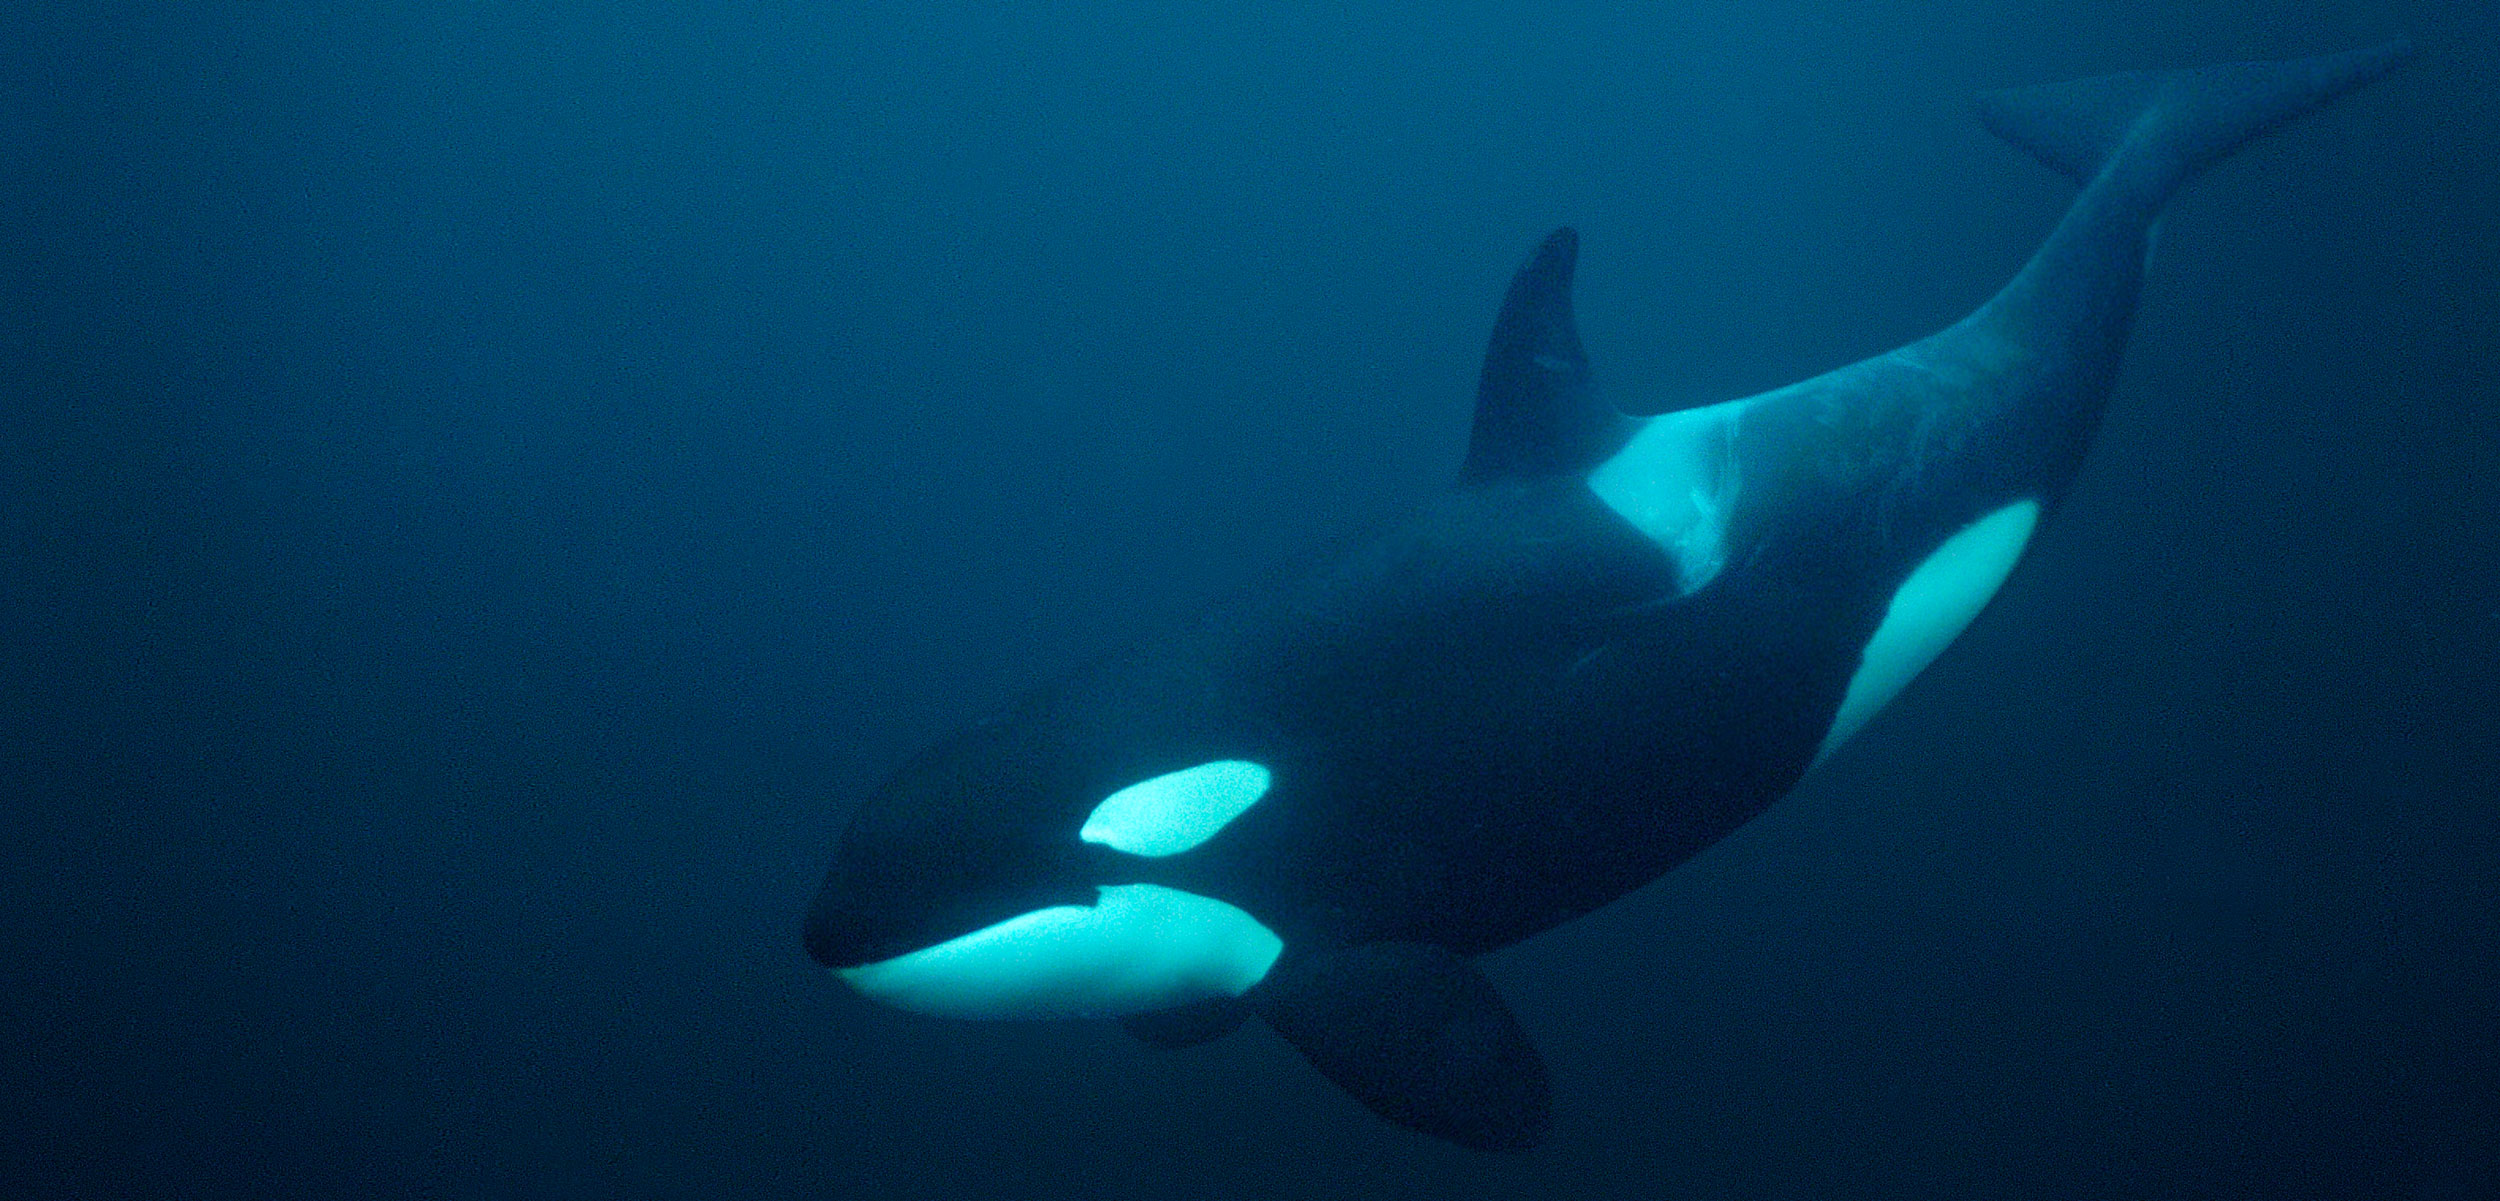 Orca Whale Underwater